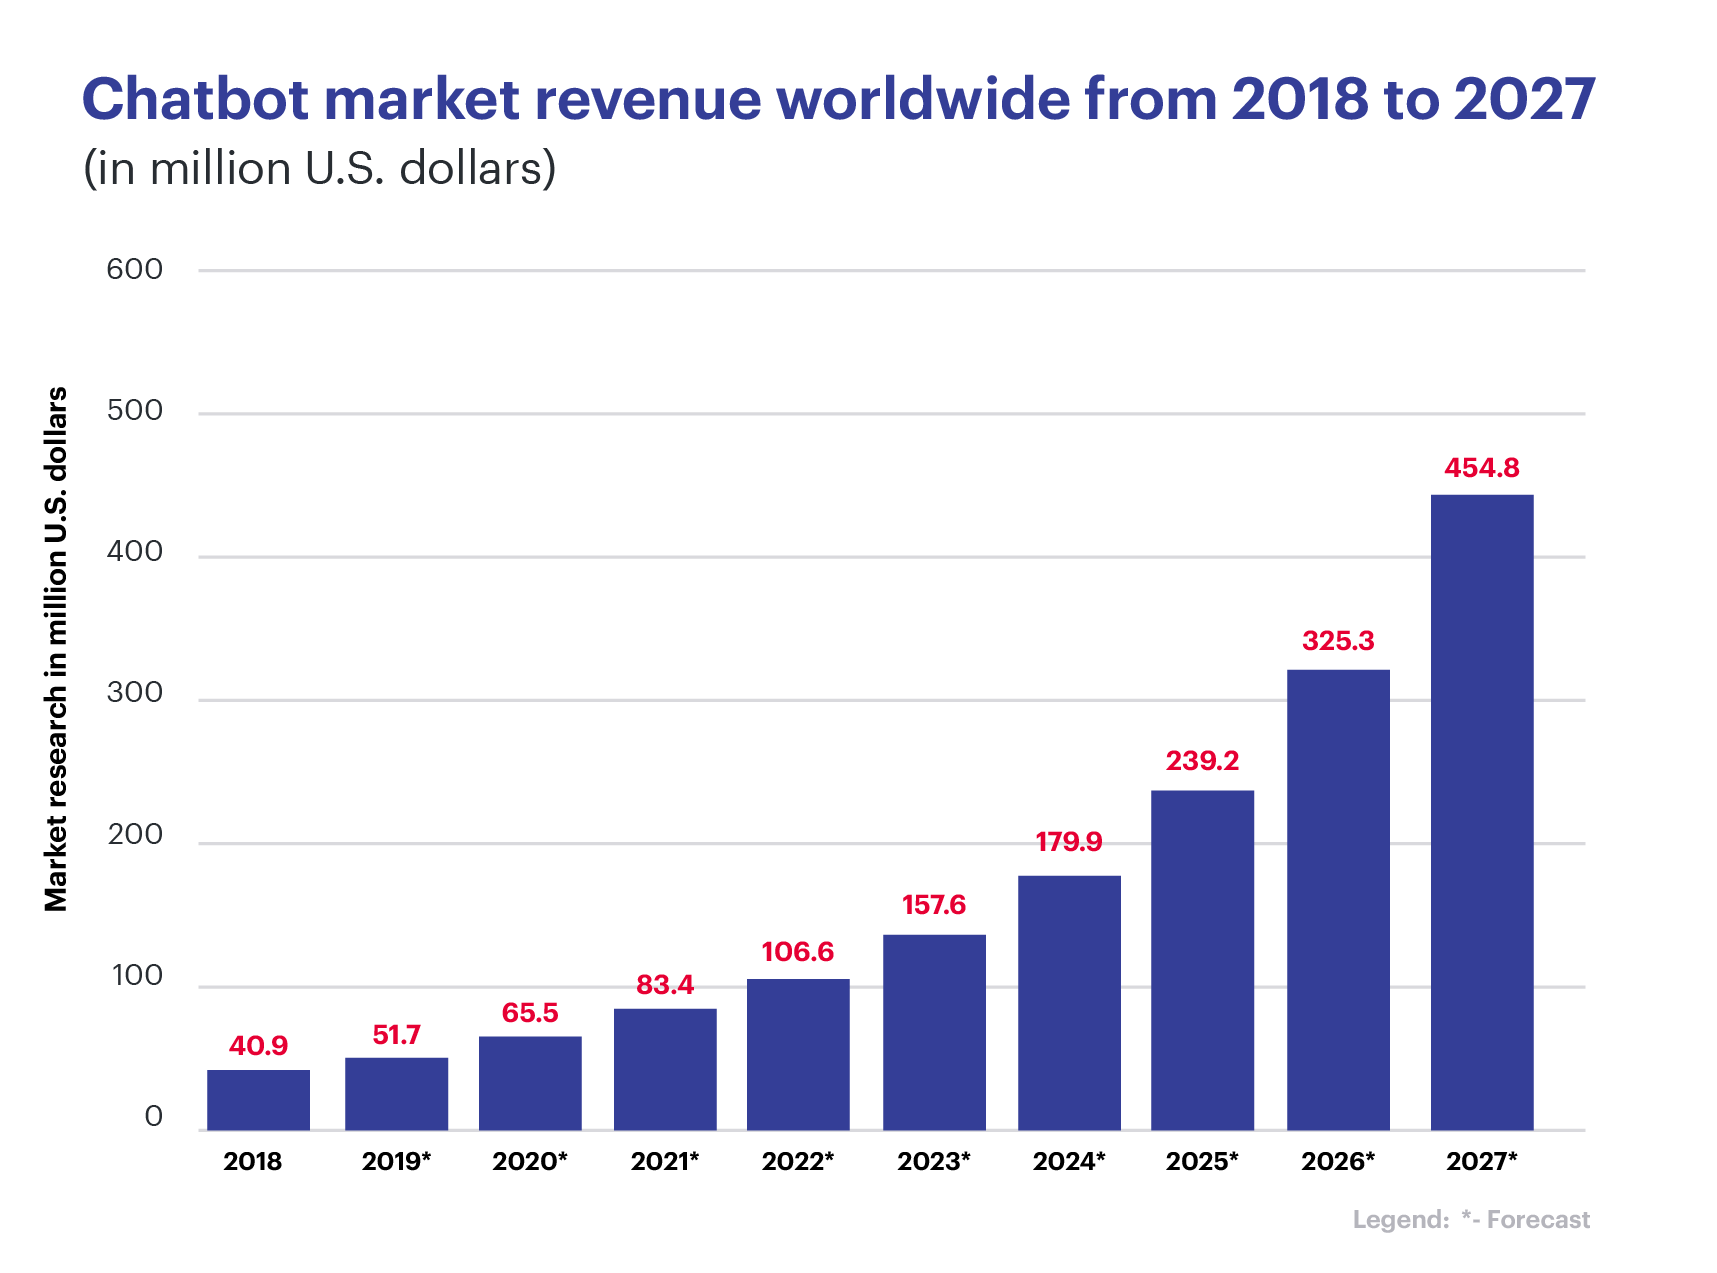 Chatbot market revenue worldwide from 2018 to 2017